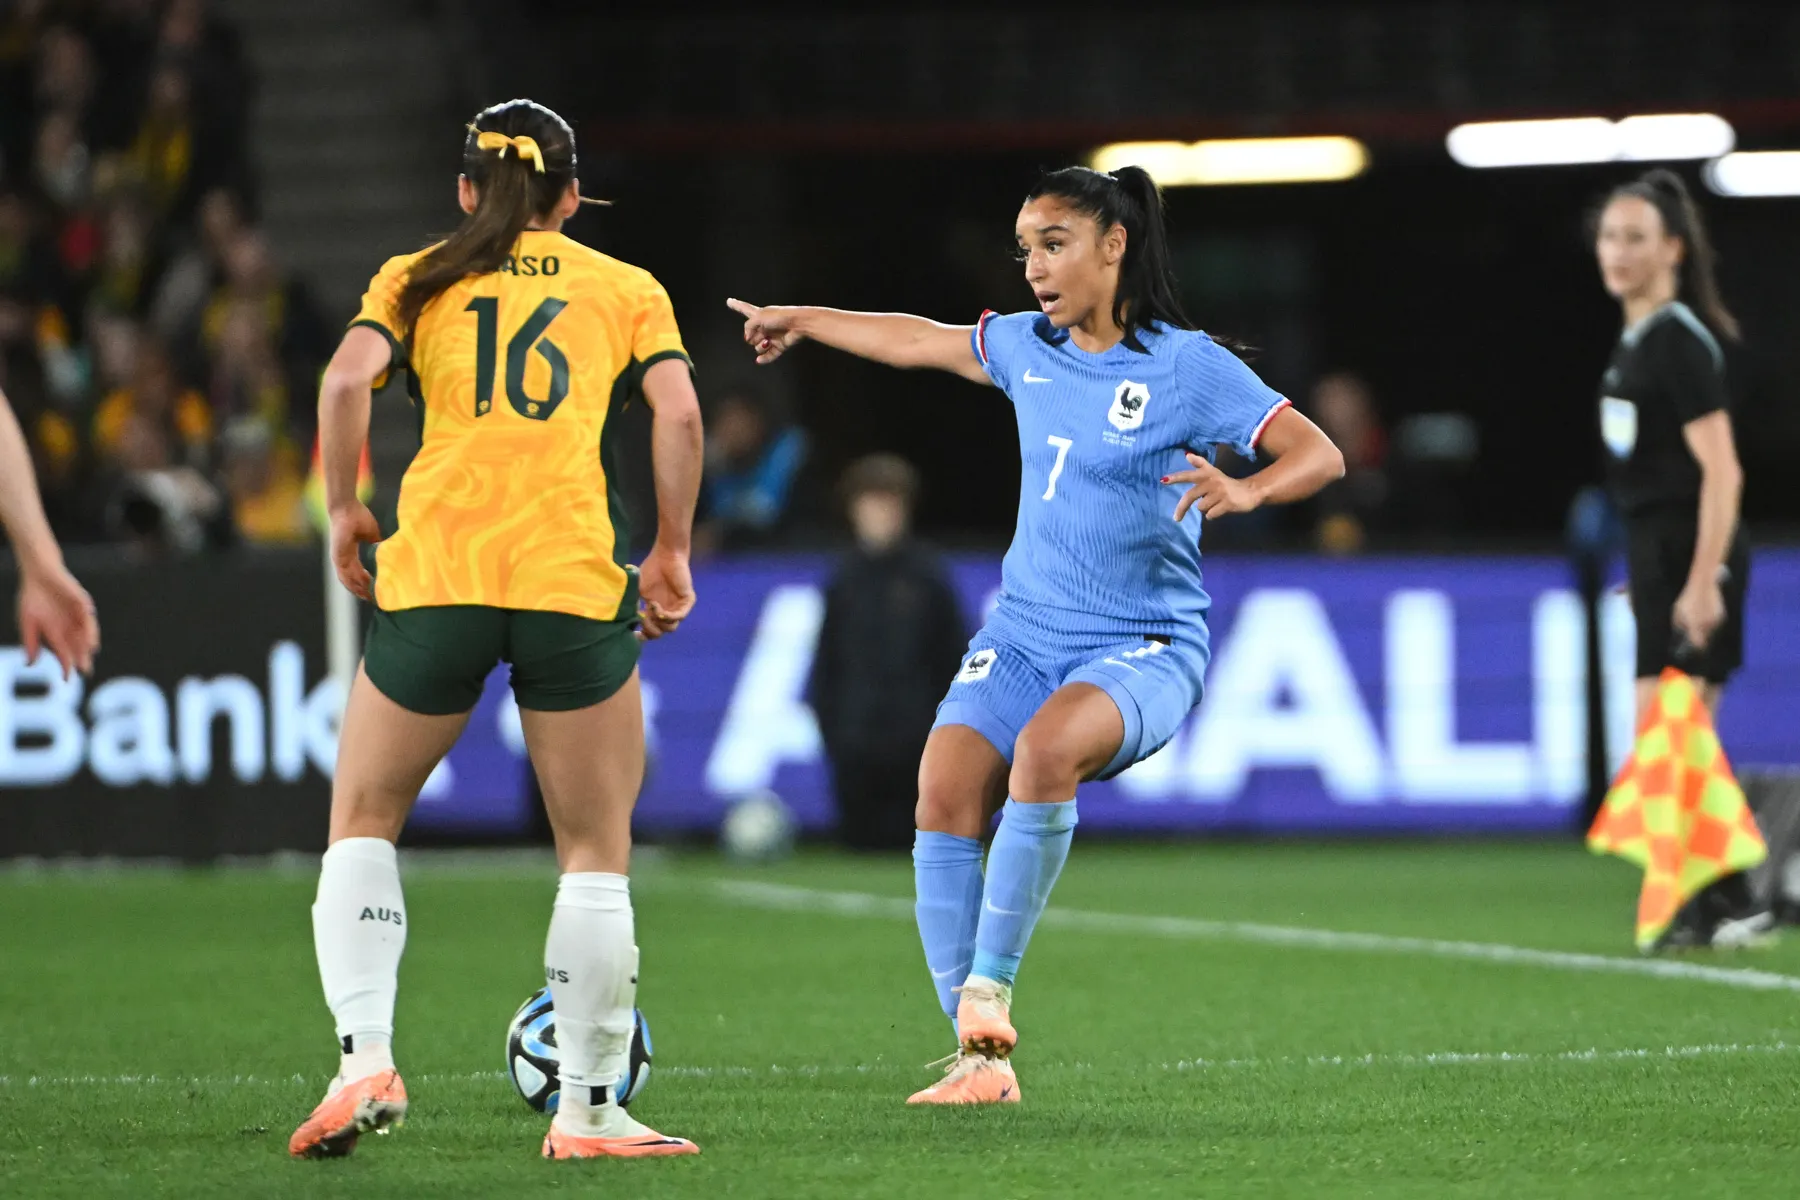 CommBank Matildas, ‘Send Off’ Match v France at Marvel Stadium in Melbourne, Australia on 14 July, 2023 Hayley Raso of Australia and Sakina Karchaoui of France in action during a friendly match between Australia and Canada ahead of the FIFA Women's World Cup.